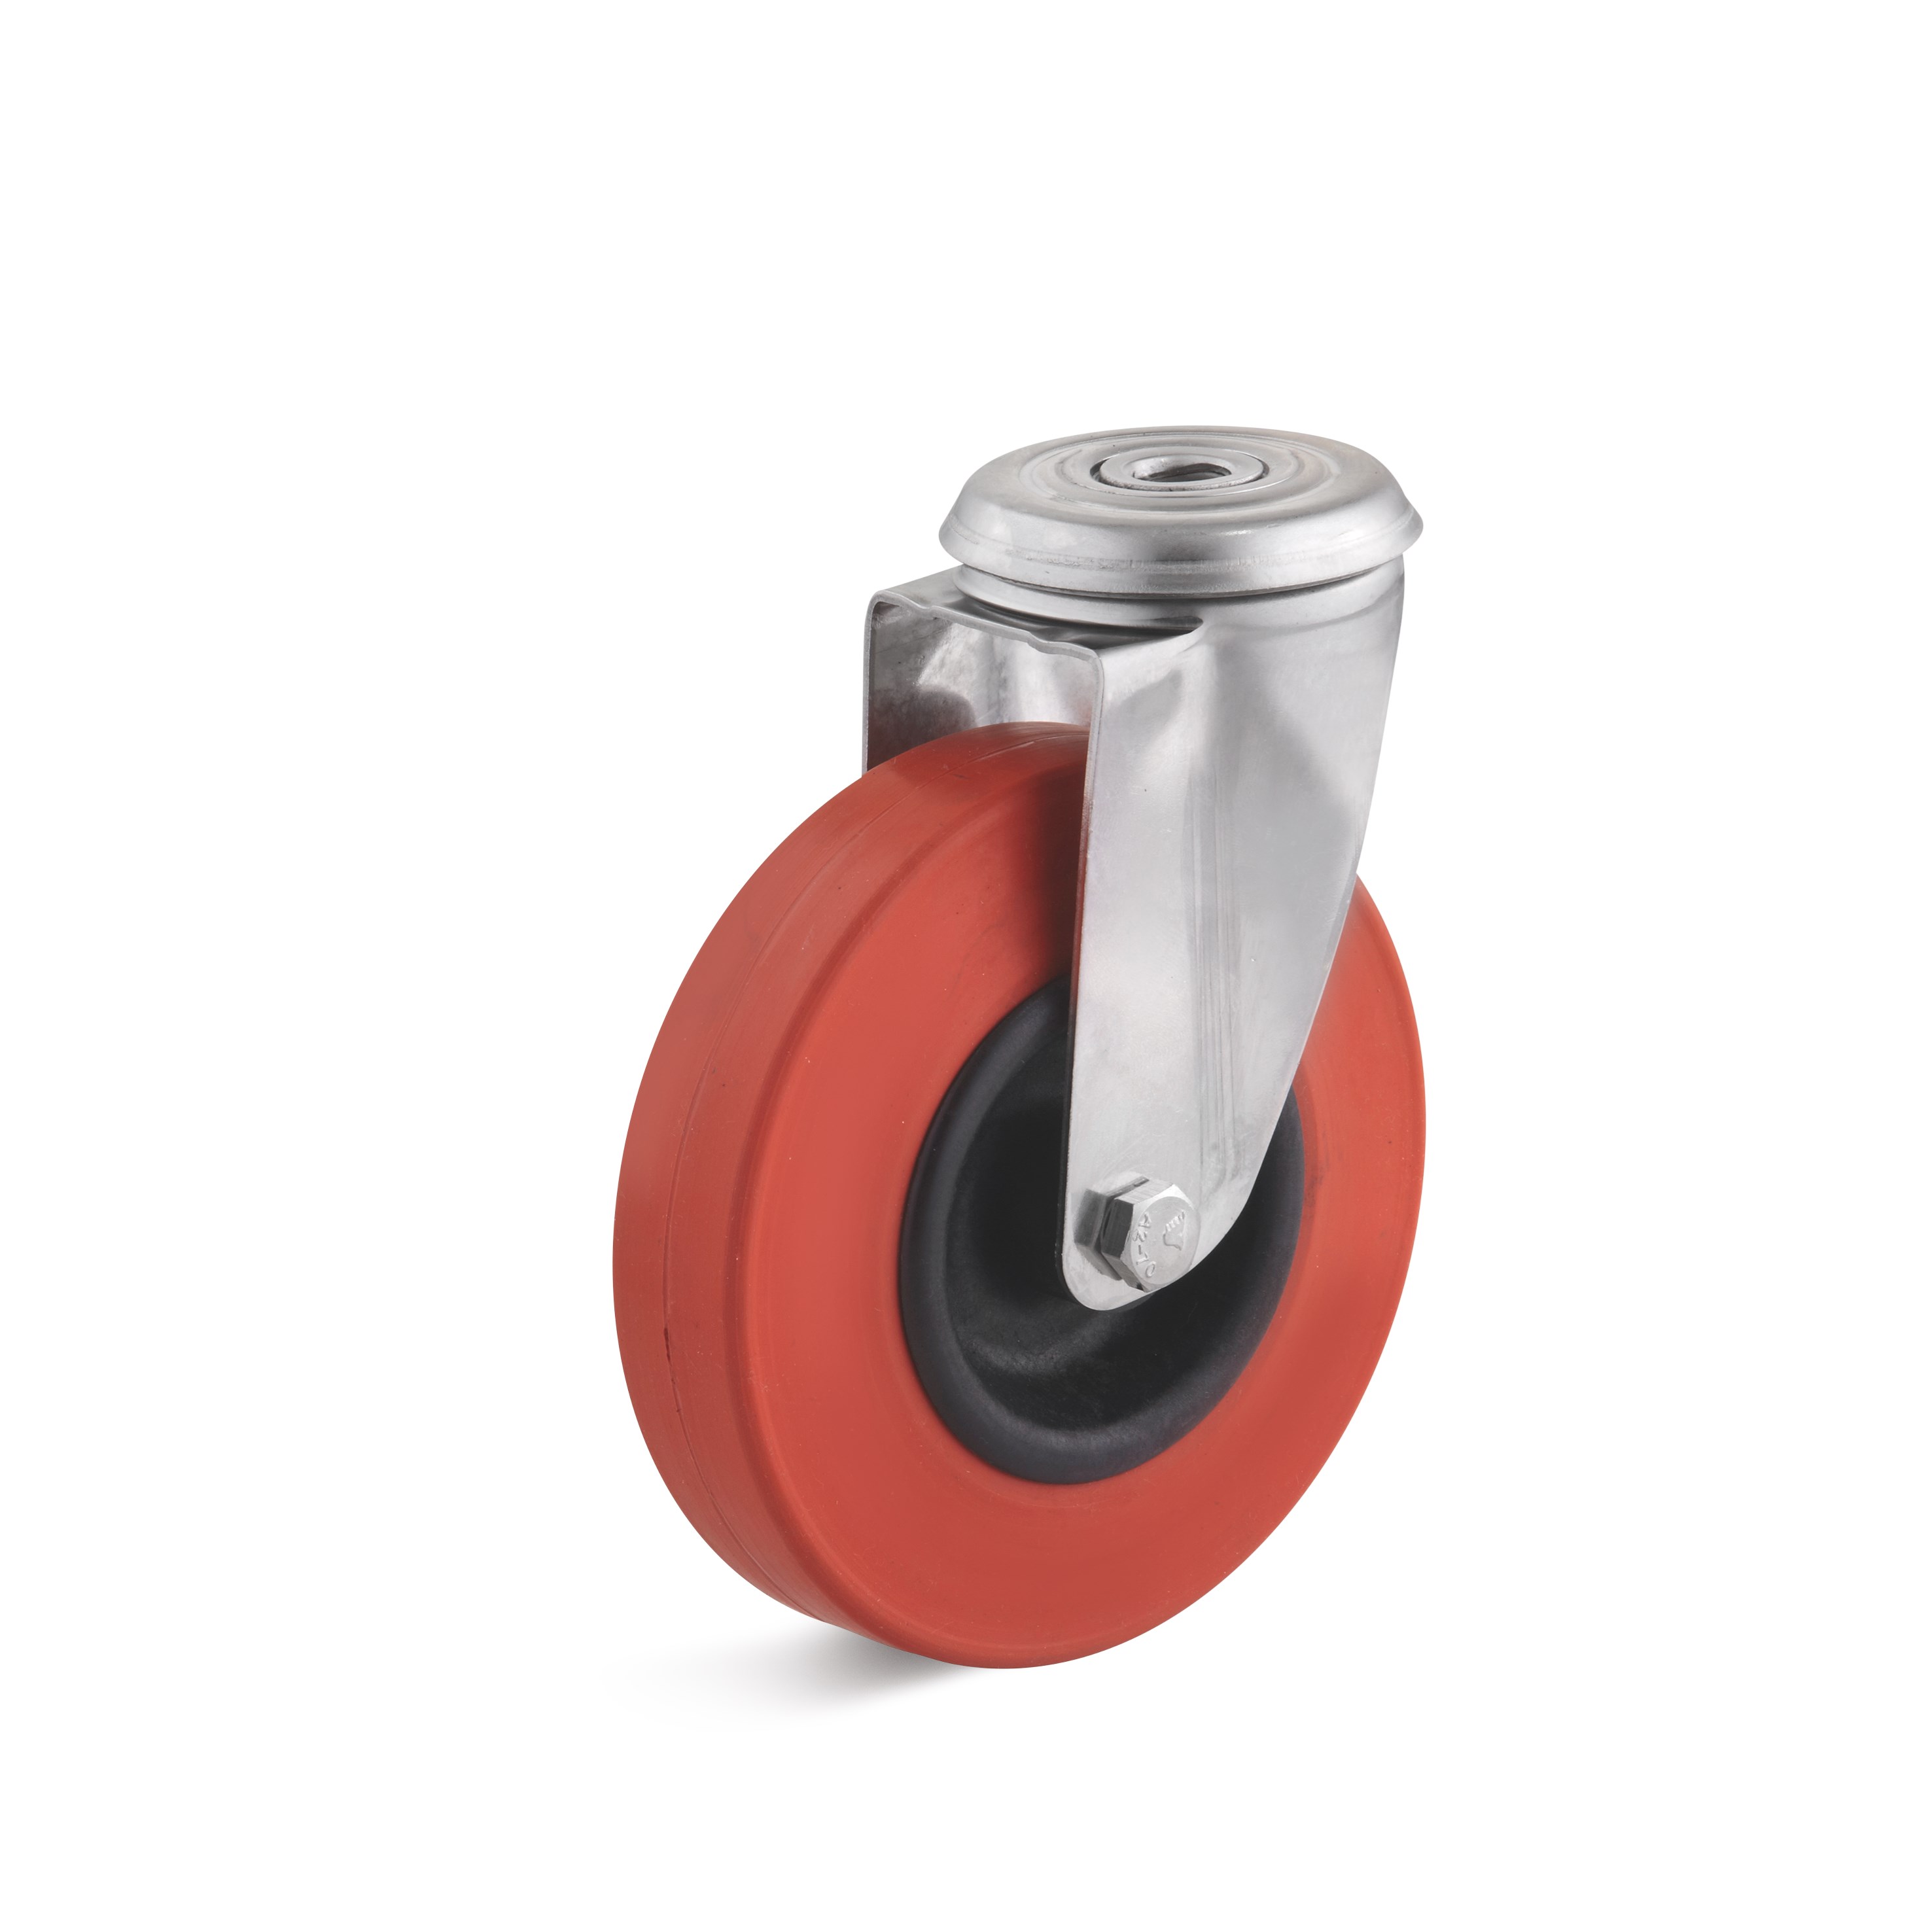 Stainless steel swivel castor with back hole and heat-resistant wheel